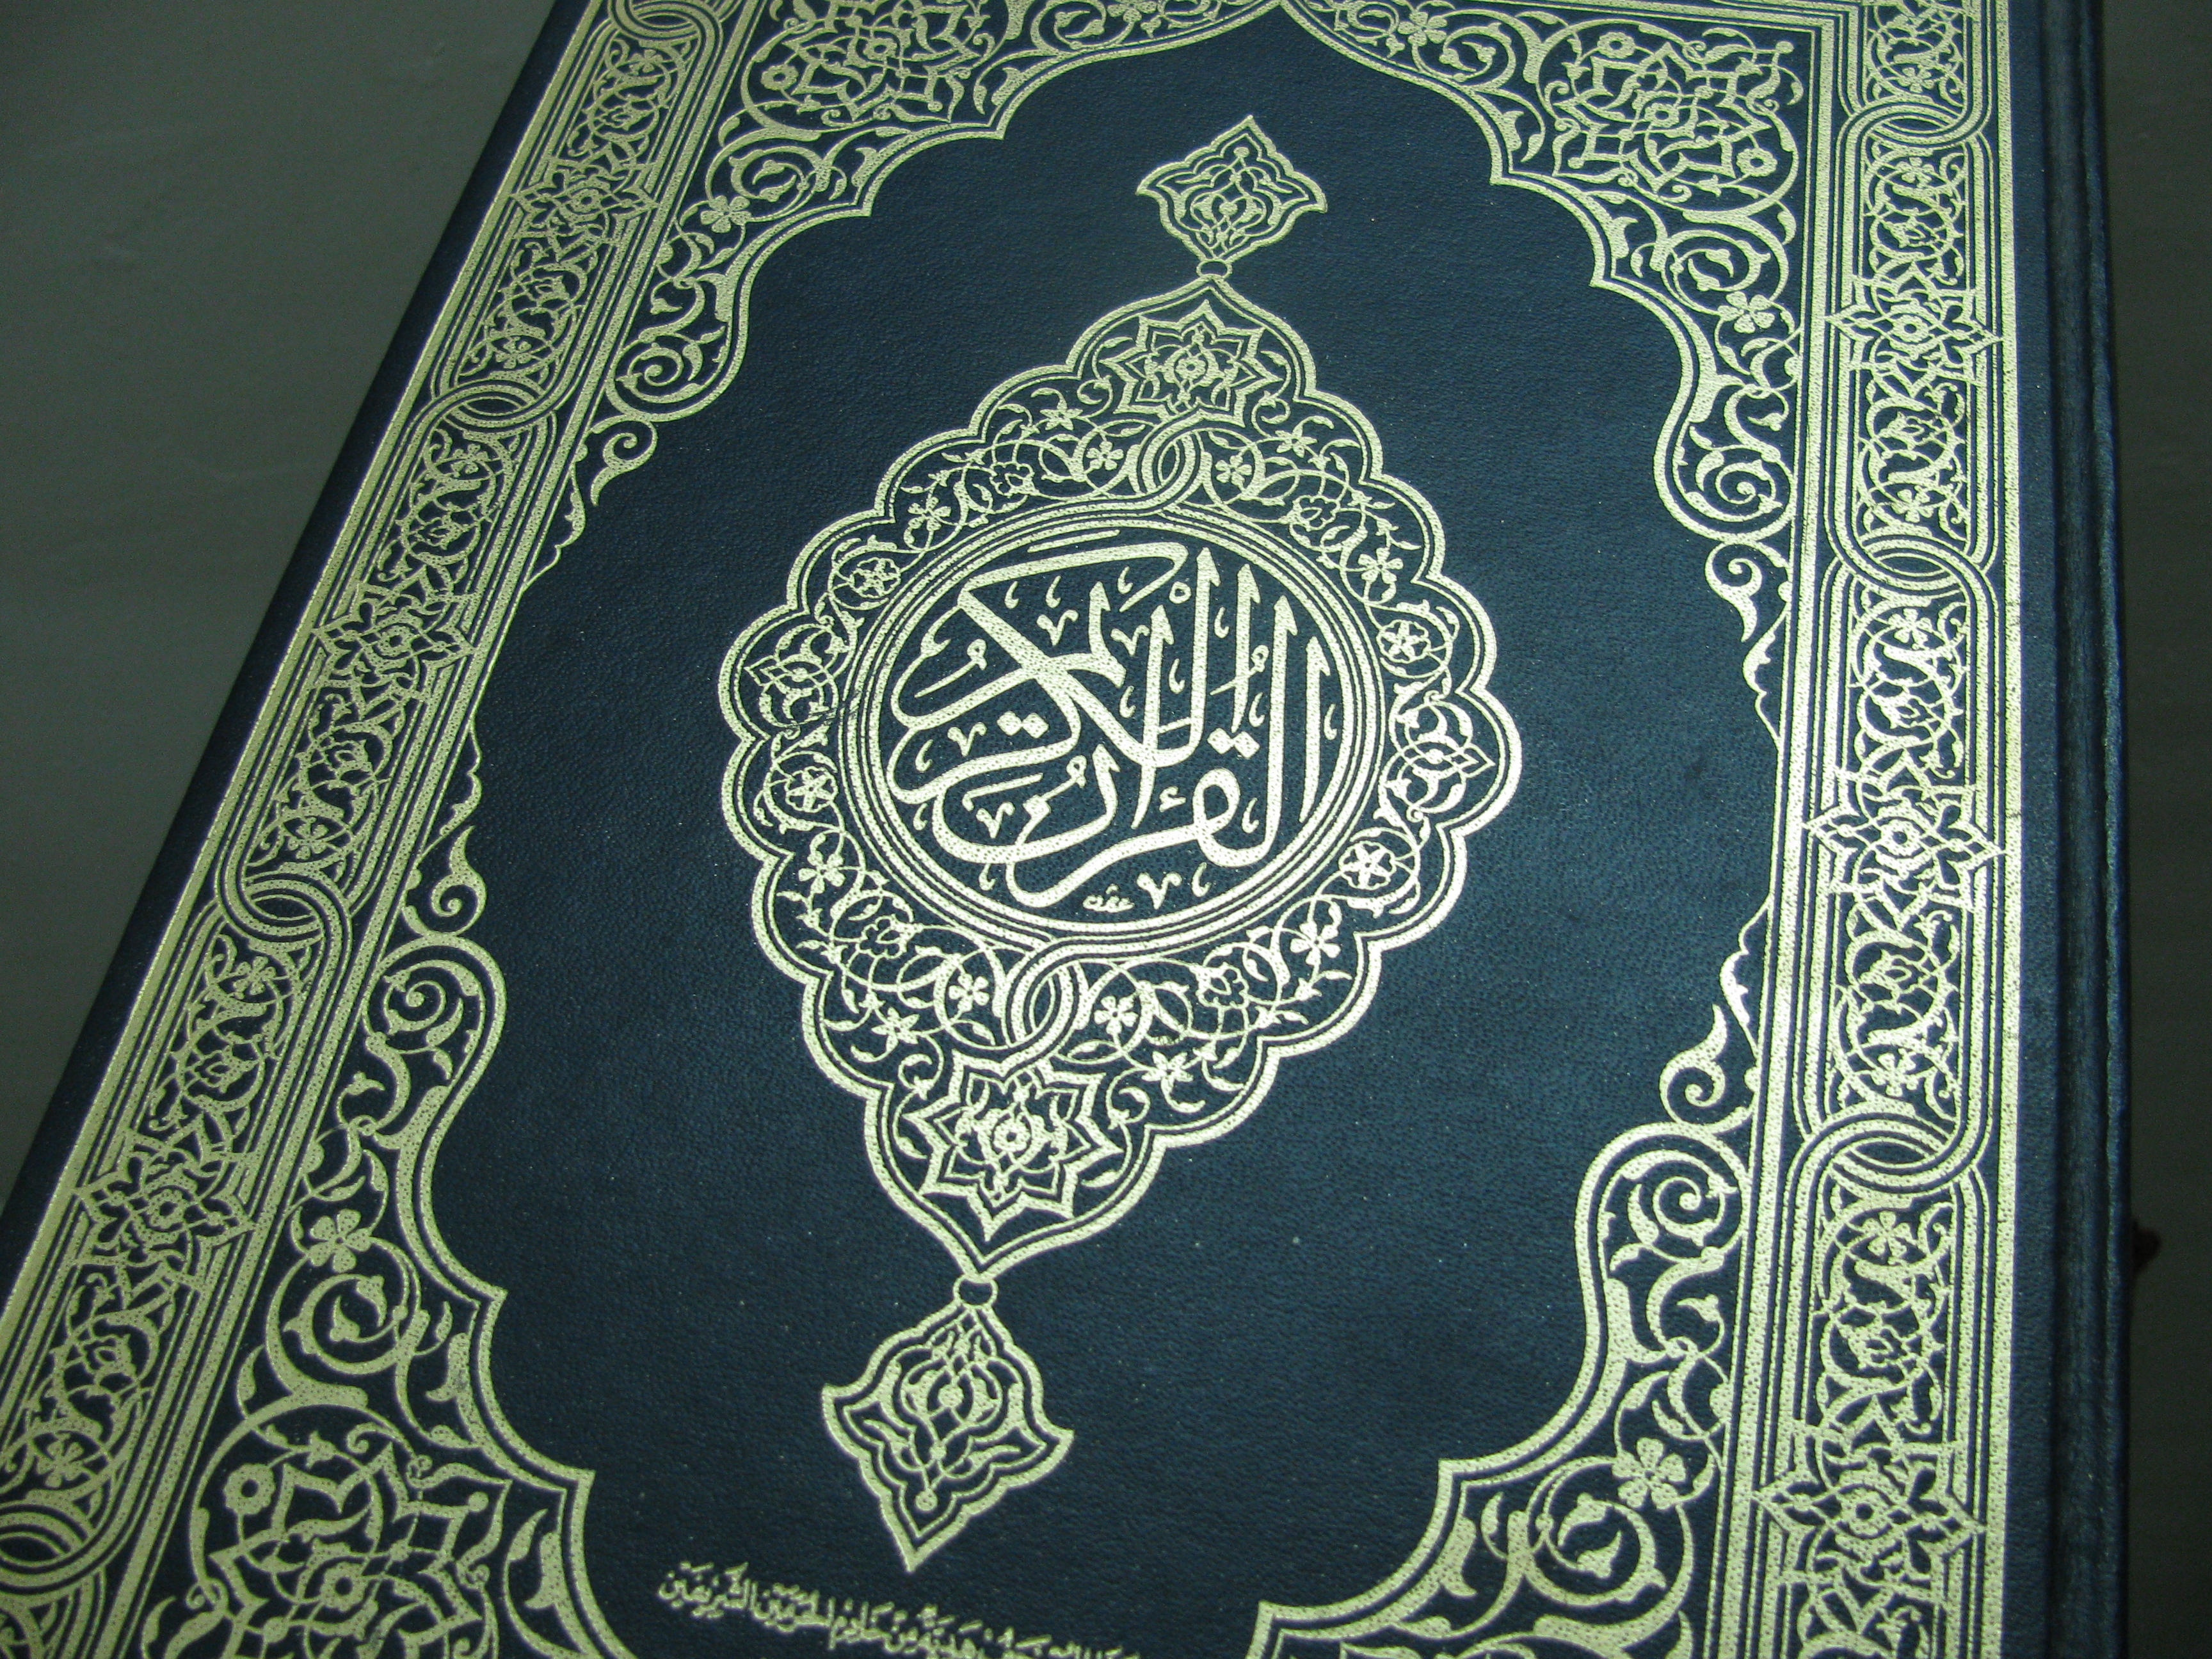 Holy Quran Cover by stylat on DeviantArt